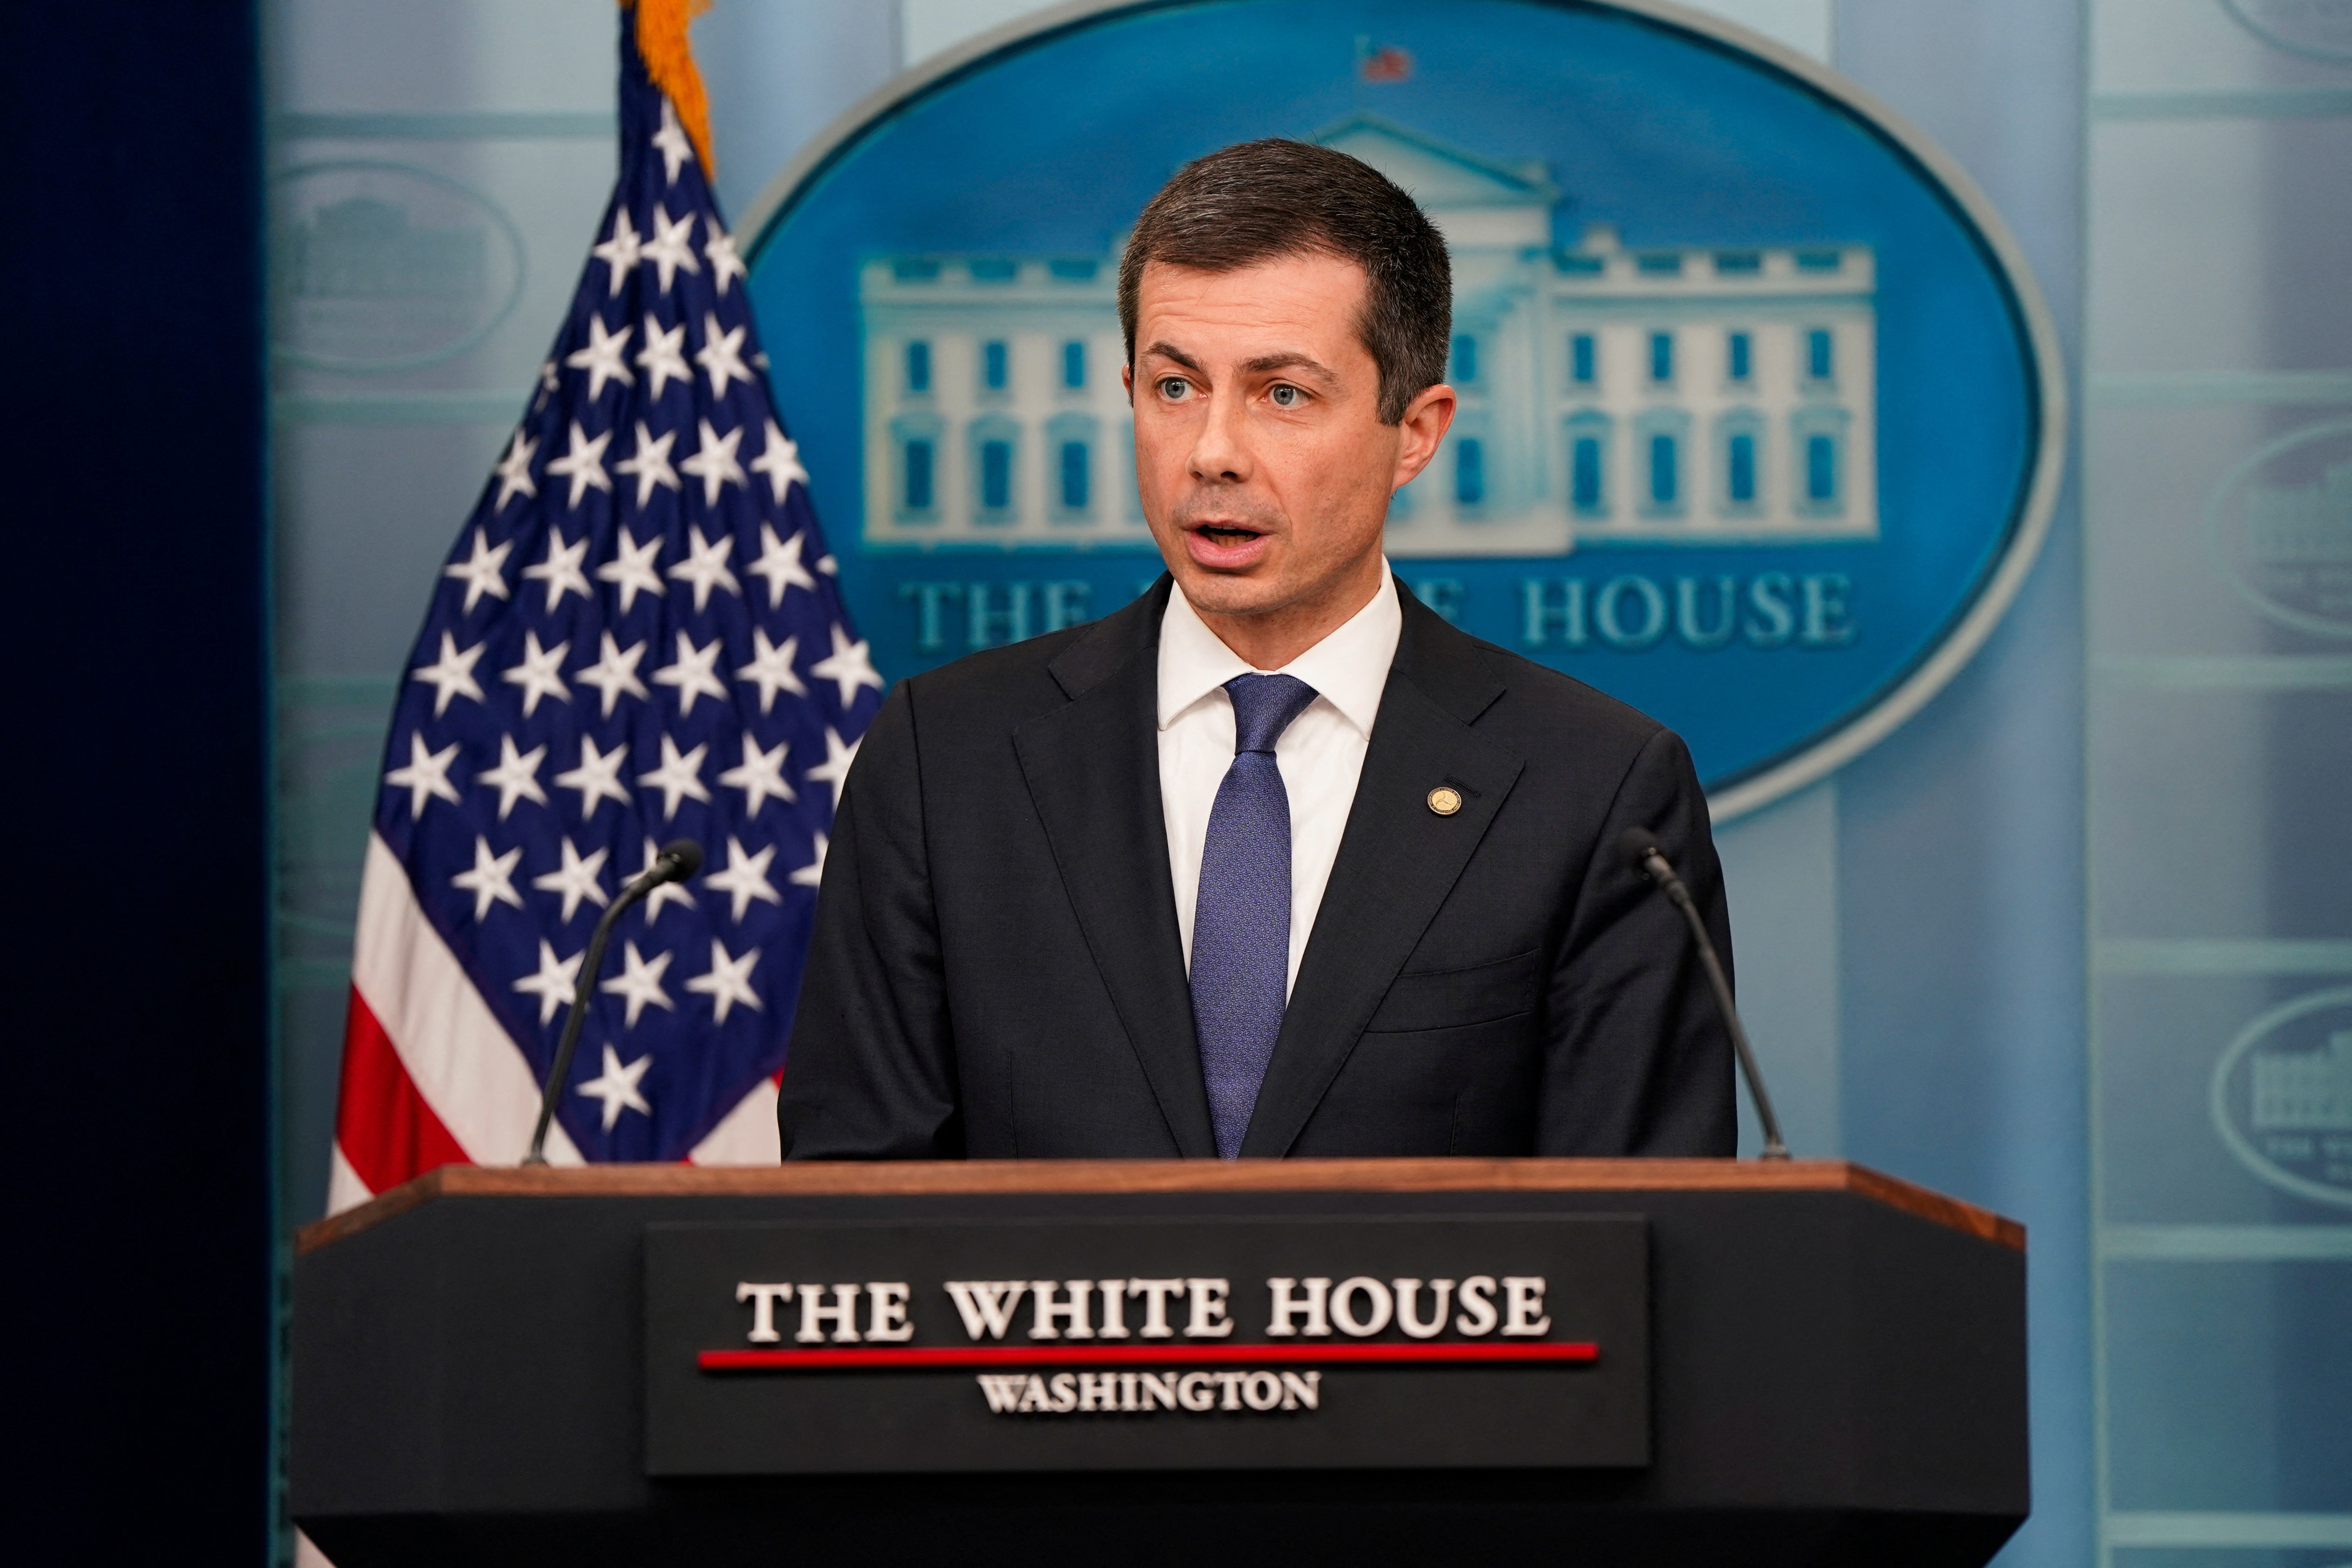 US Secretary of Transportation Pete Buttigieg said that a ‘main area of concern’ was also the livelihoods of port workers